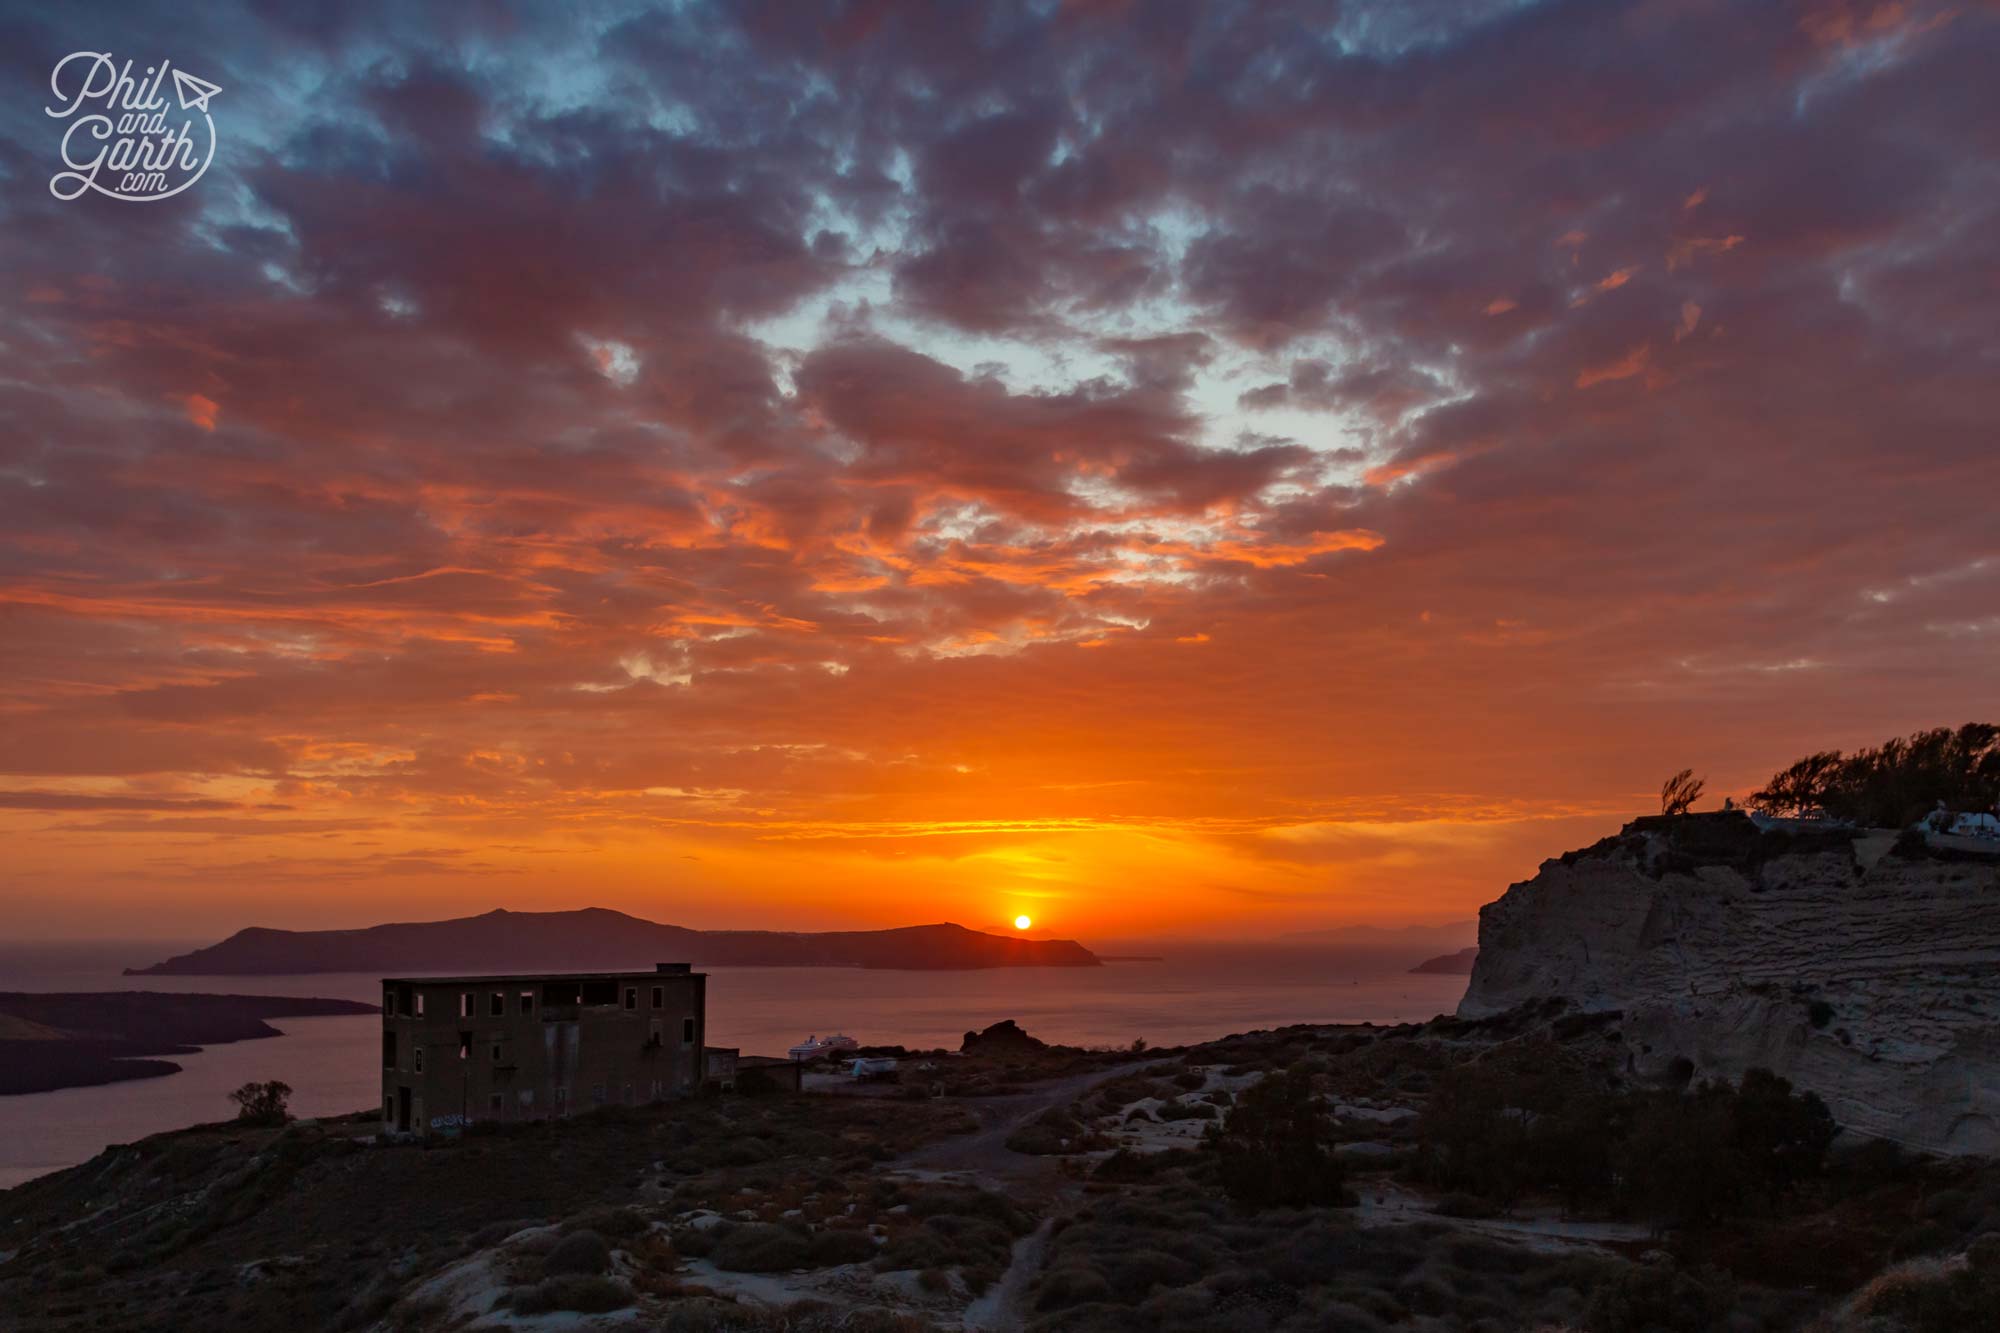 A spectacular sunset, free of crowds from outside the Orama Hotel Santorini